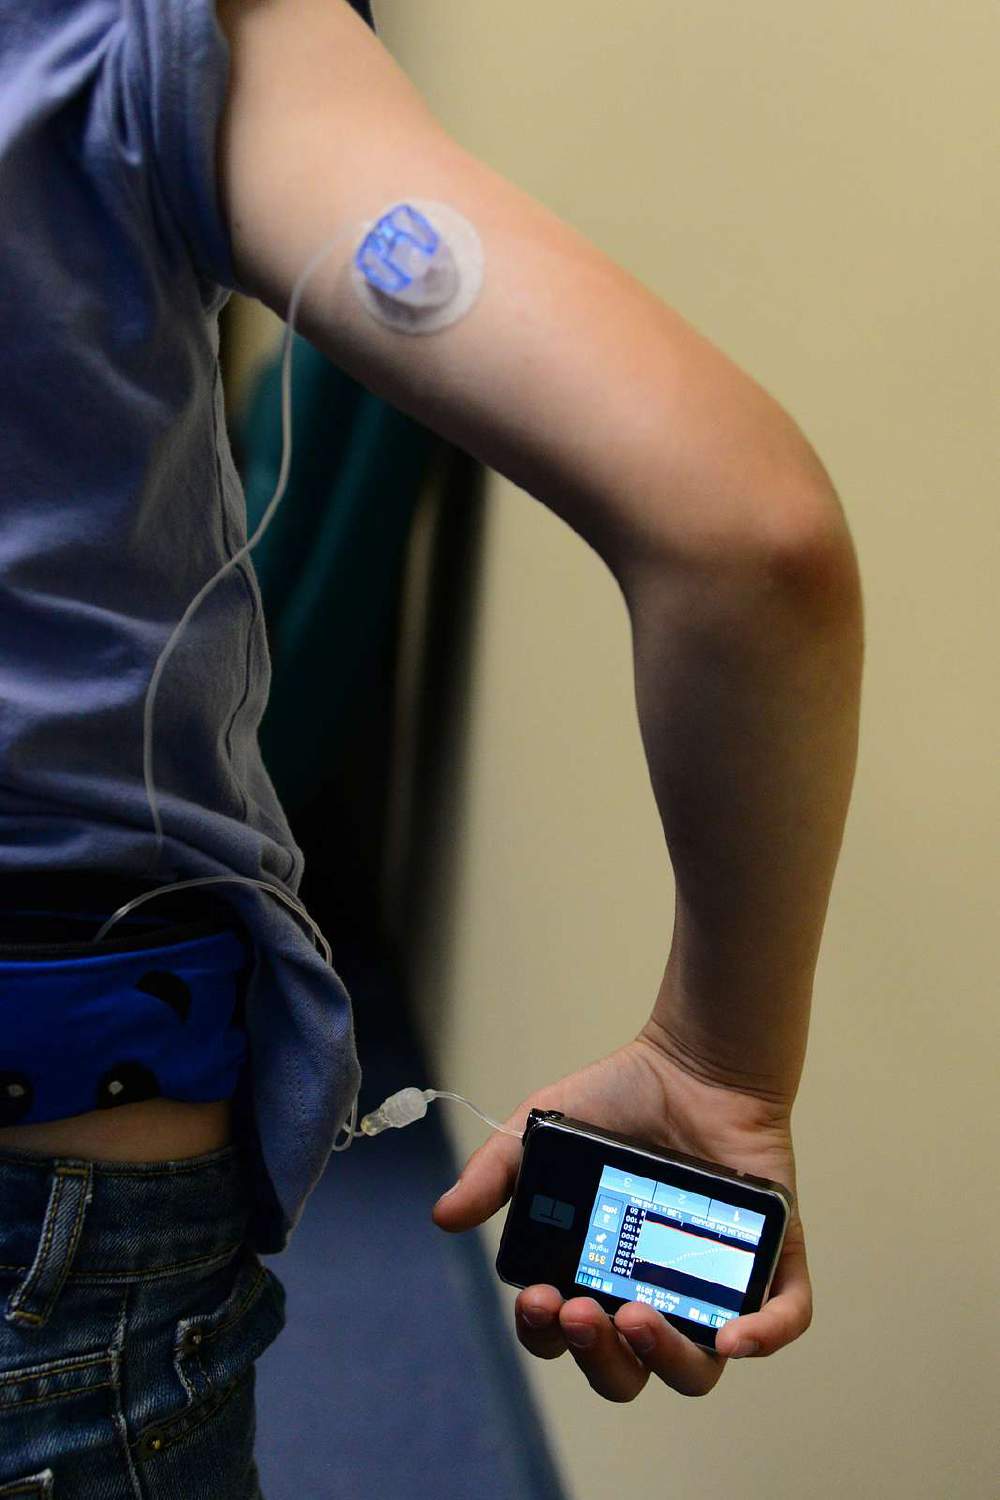 Could an Insulin Pump be the perfect accessory?